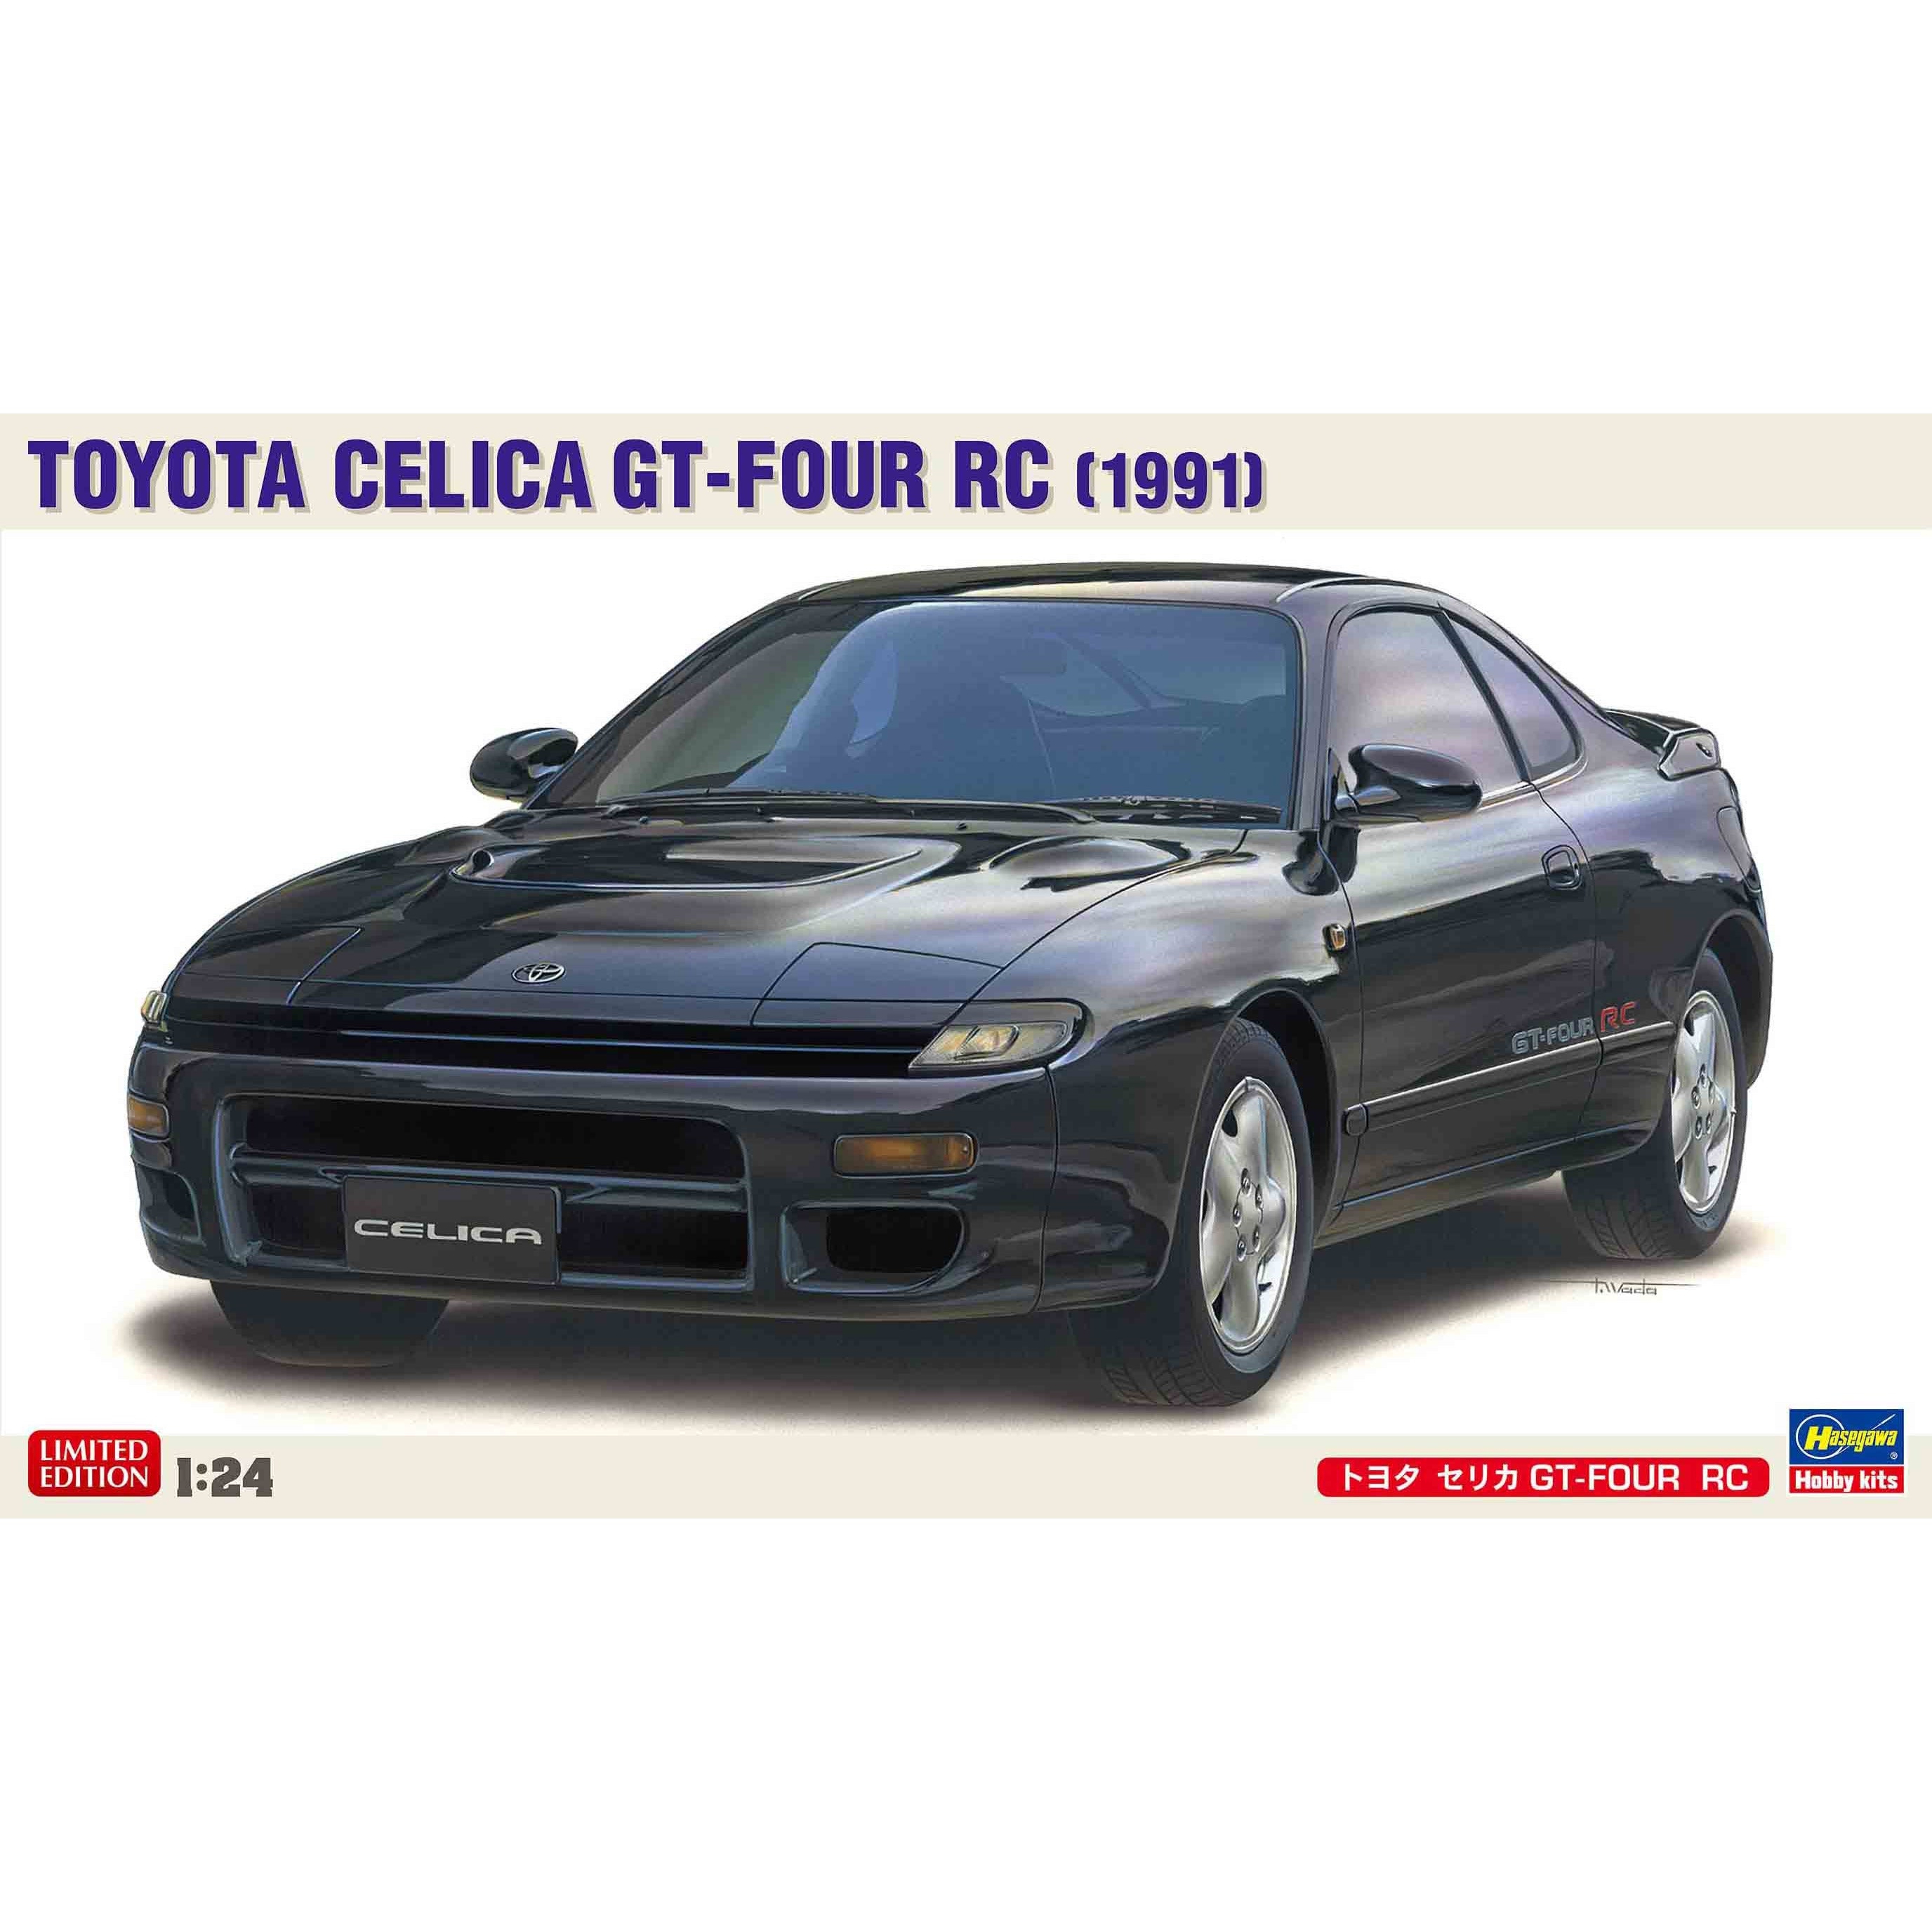 Toyota Celica GT-Four RC 1/24 Model Car Kit #20571 by Hasegawa